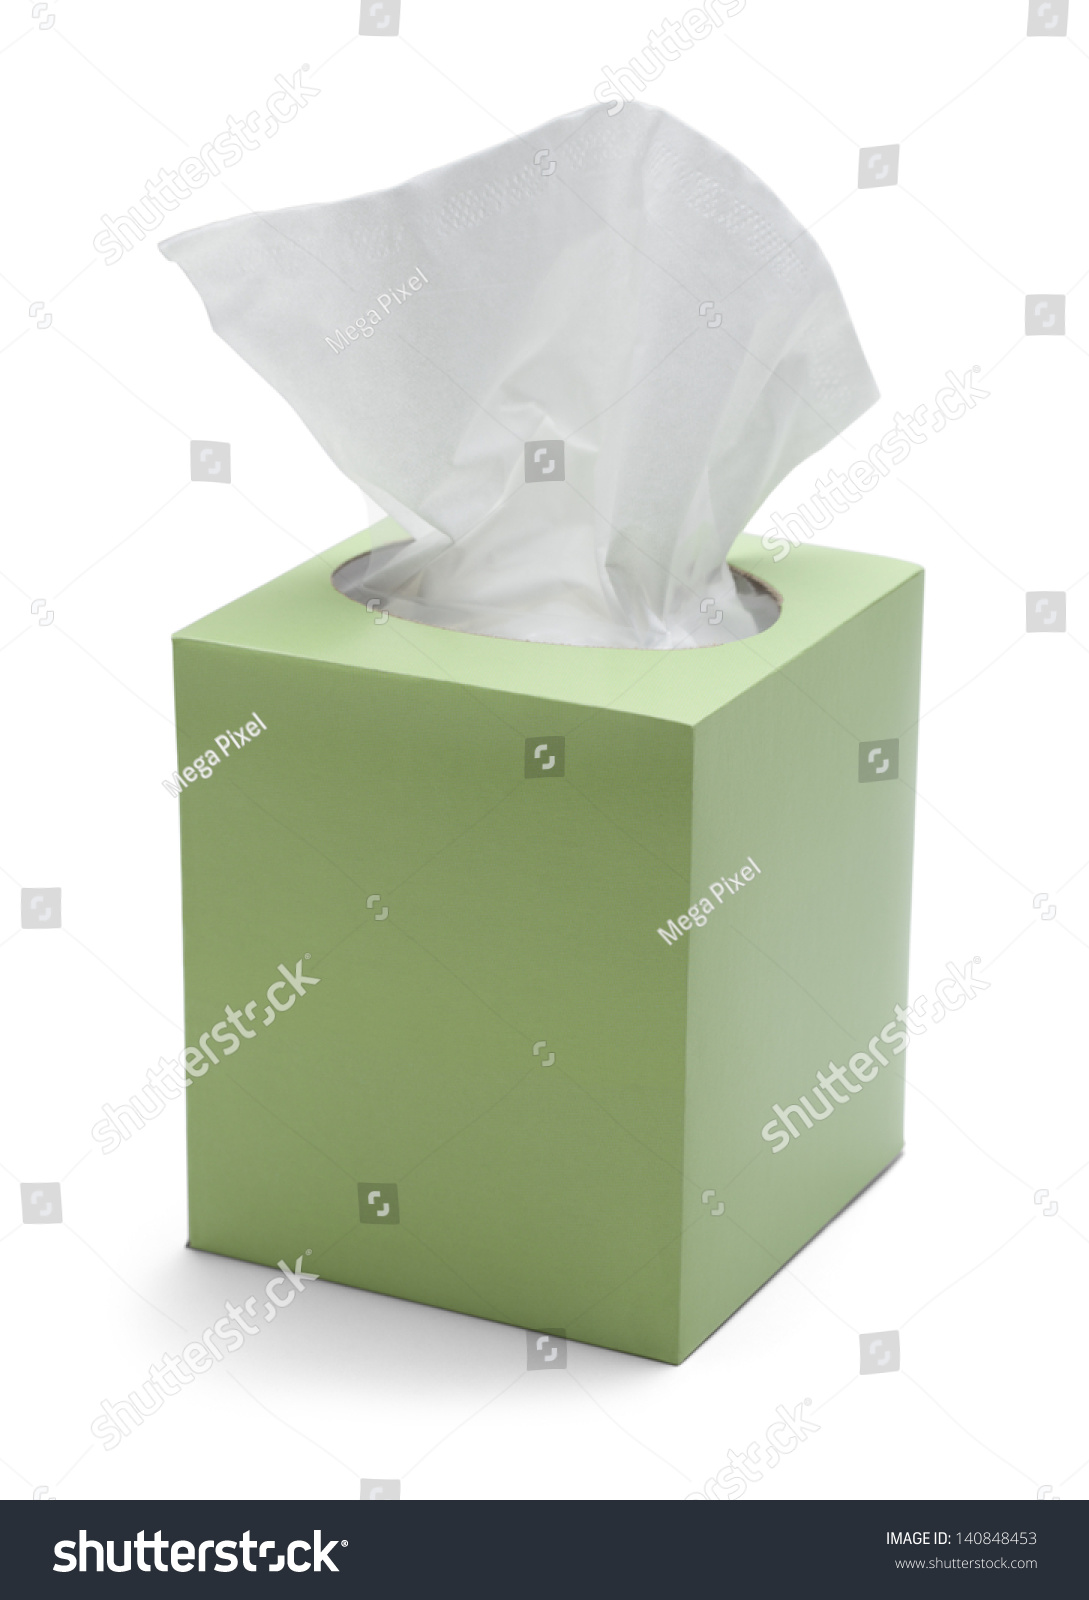 Green Box of Tissues Isolated On White Background. #140848453